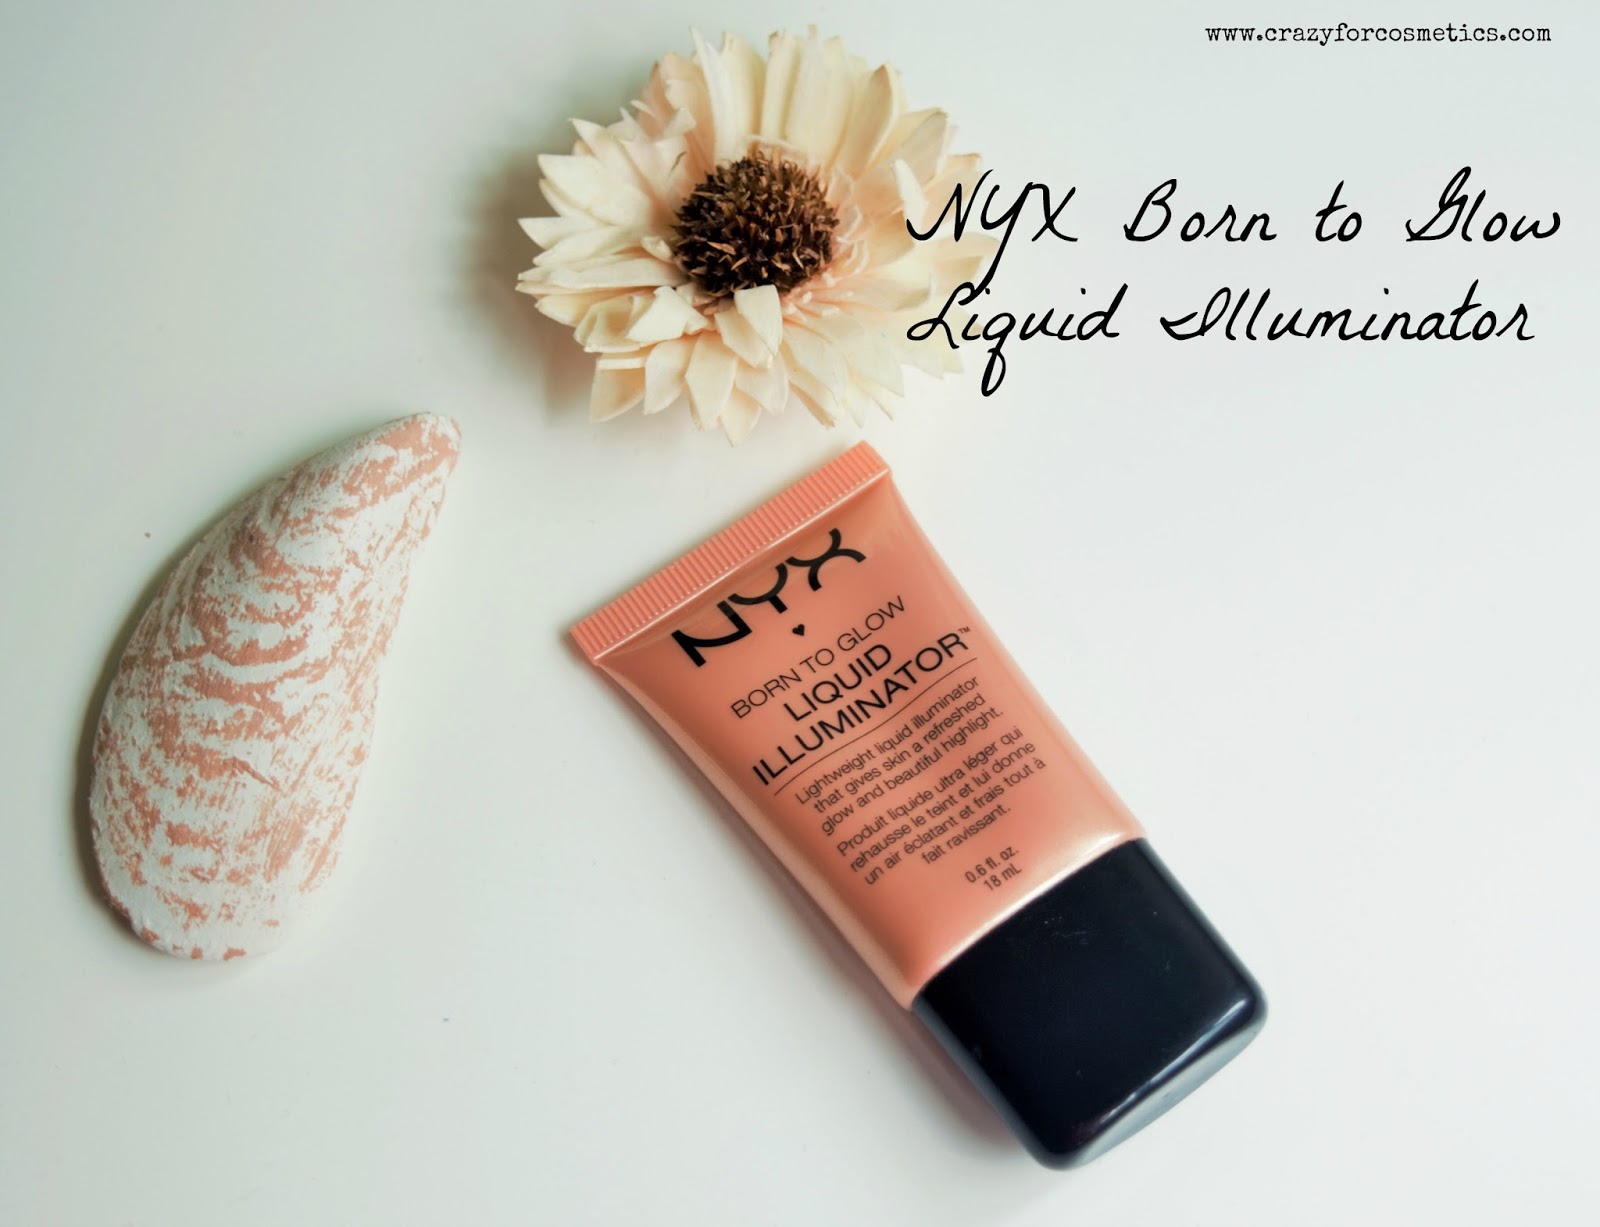 Crazy for Cosmetics- Singapore based Beauty/ Lifestyle blog about Makeup,Lifestyle and Shopping: NYX Born to Glow Liquid Illuminator the Gleam Review and Swatches